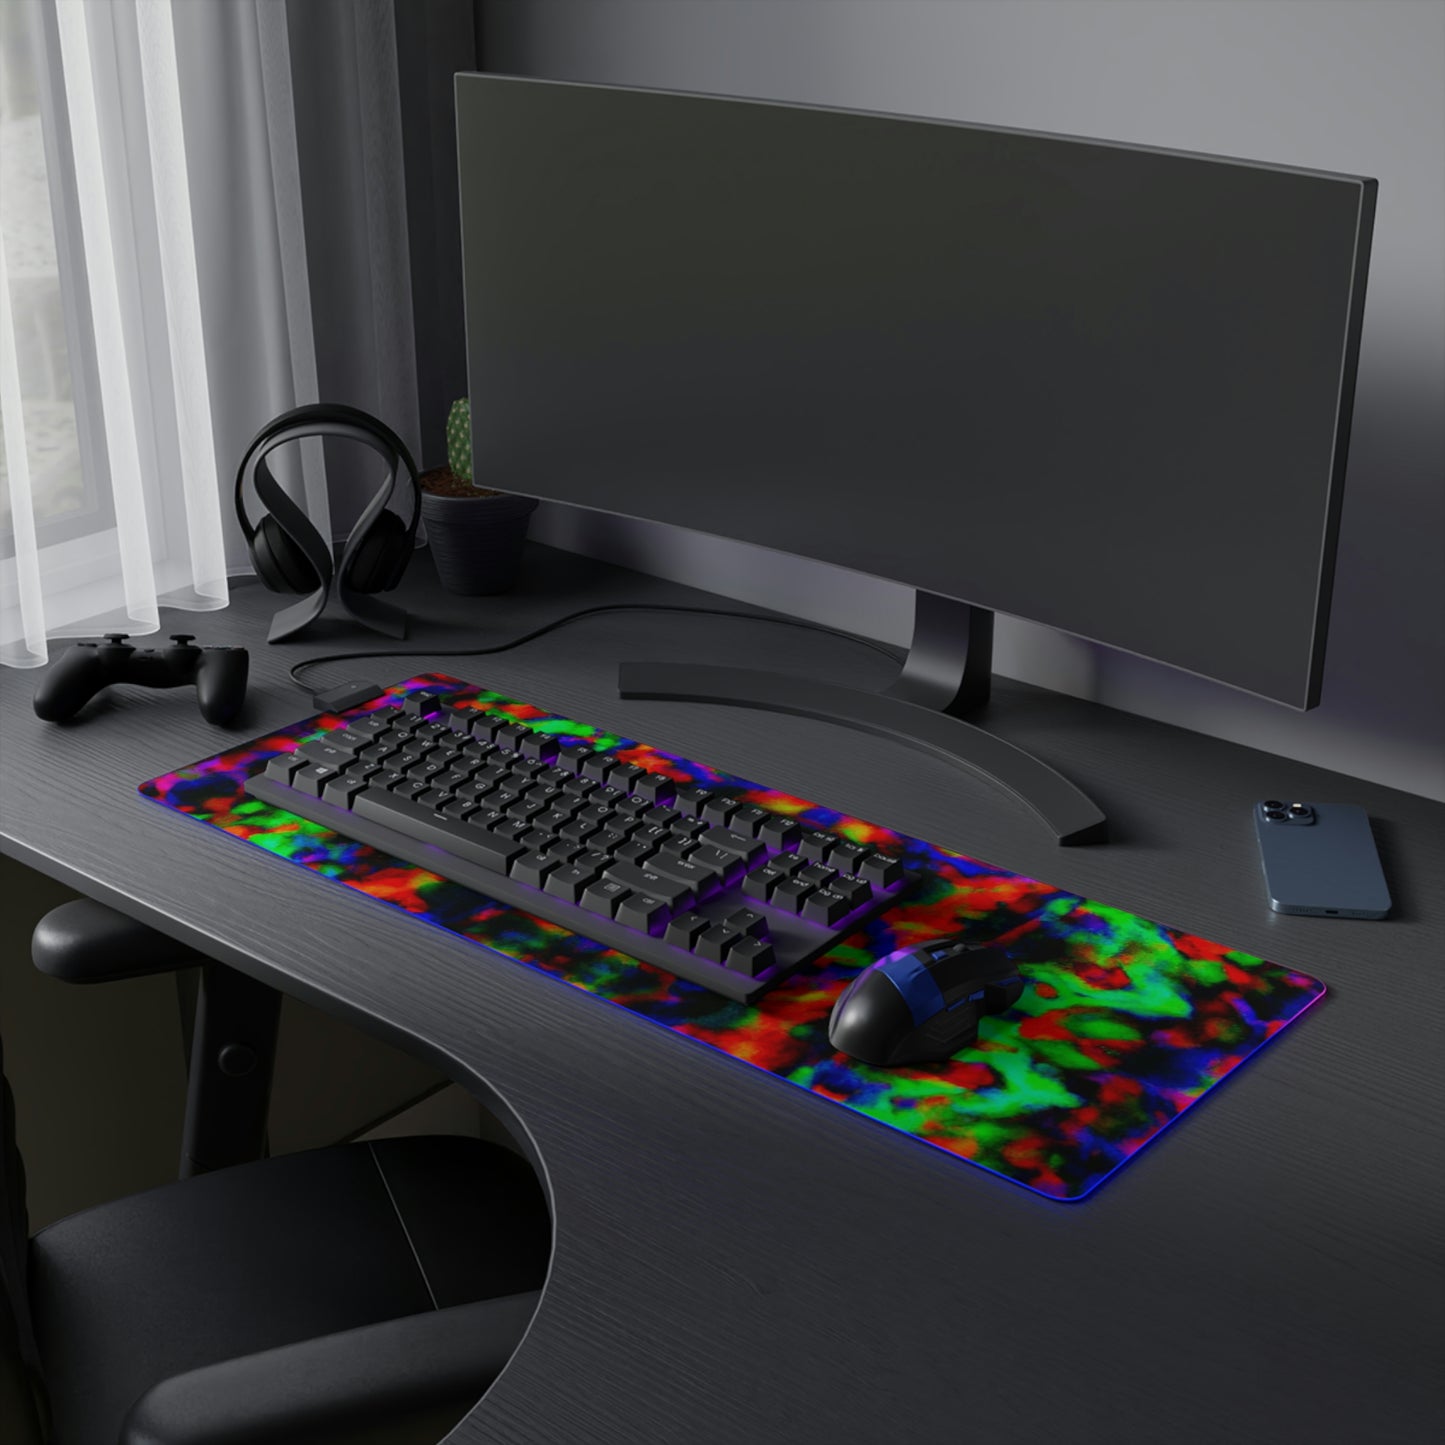 Ronald "Rockets" Roberts - Psychedelic Trippy LED Light Up Gaming Mouse Pad